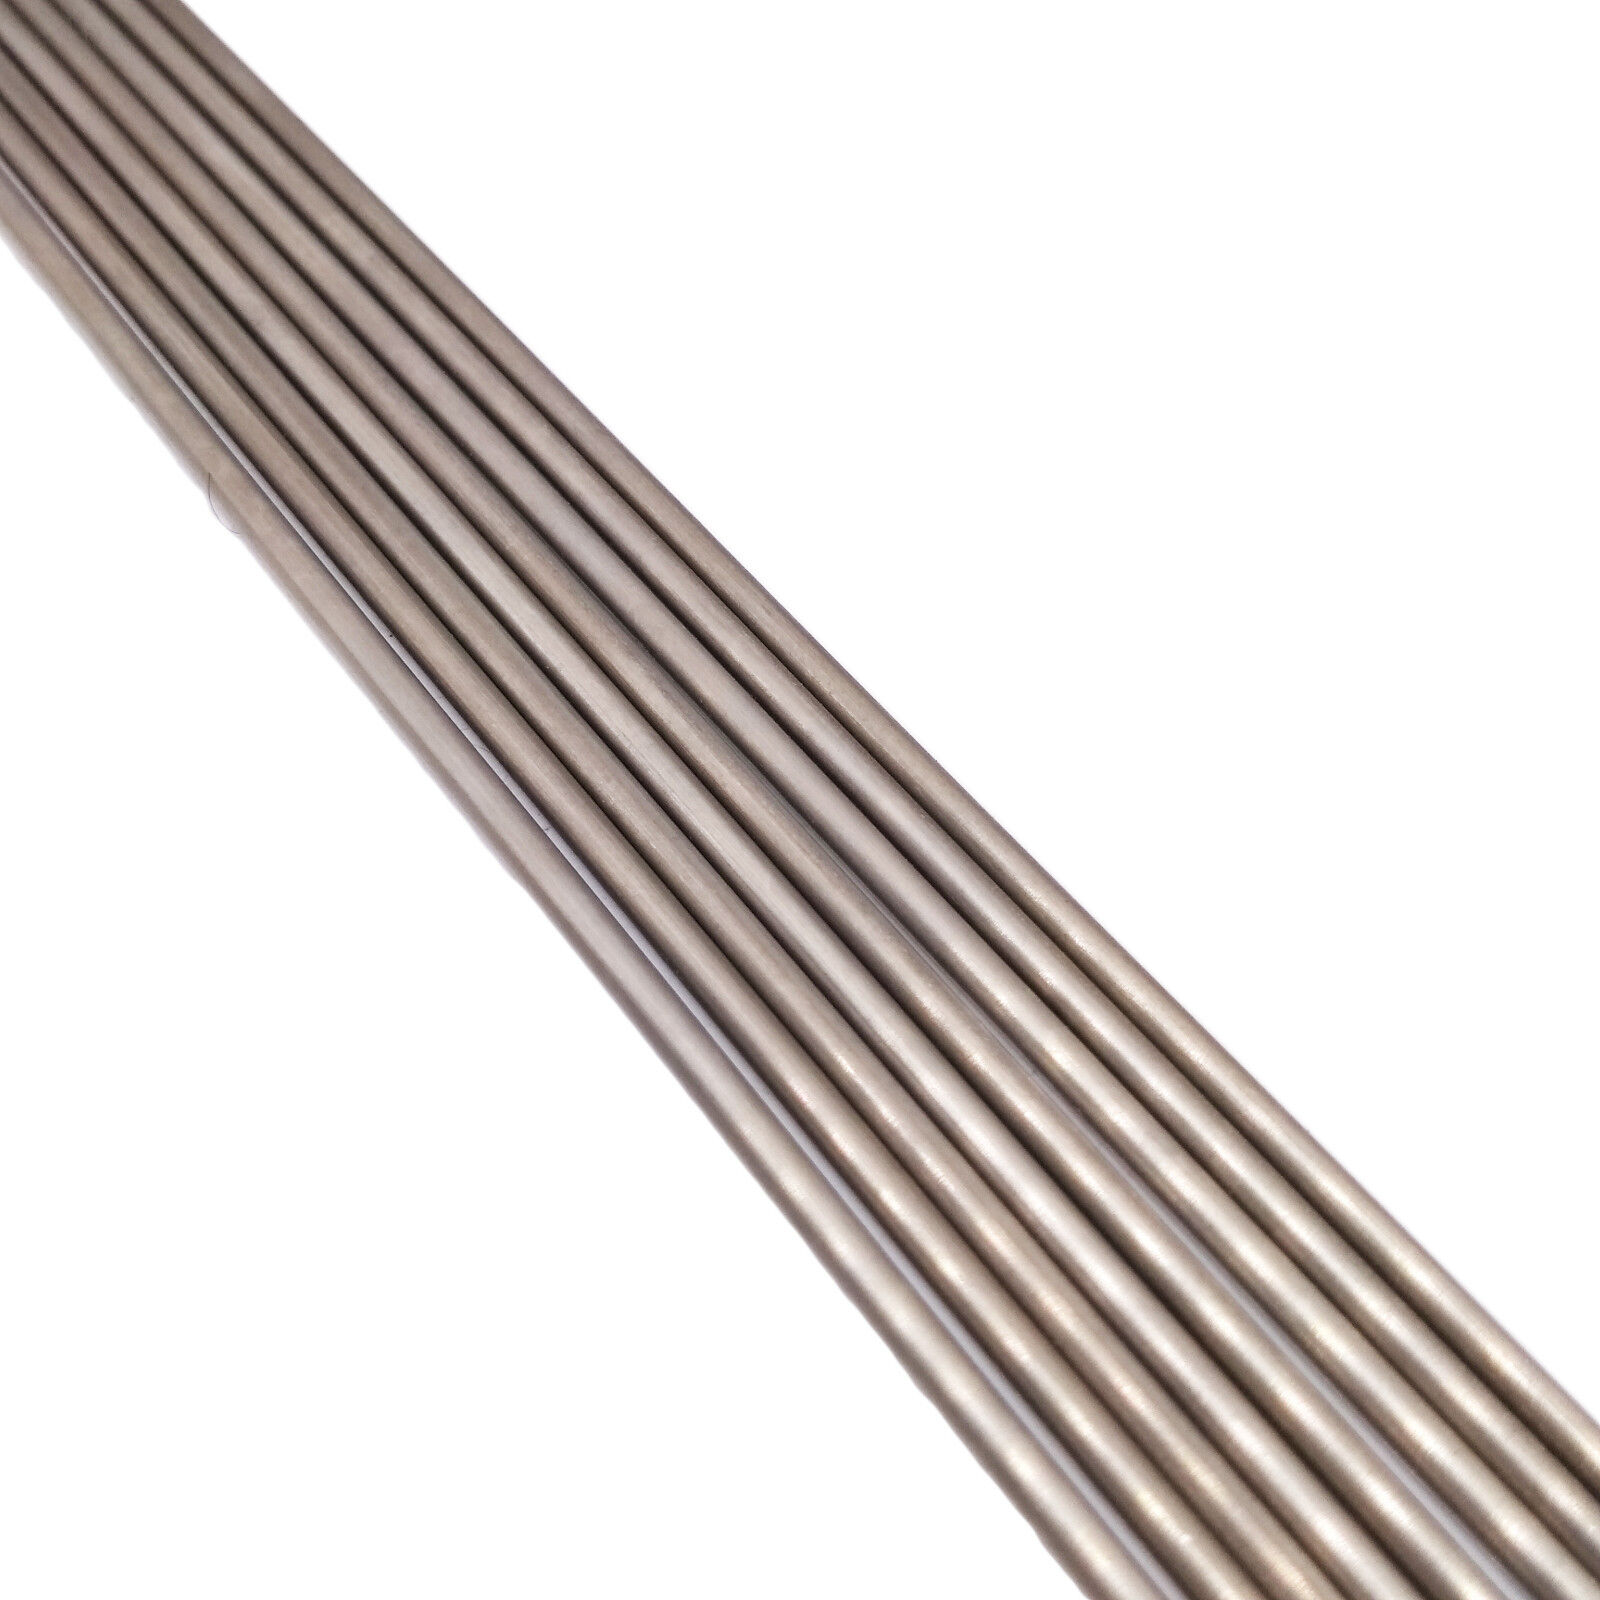 US Stock 8pcs OD 2mm ID 1.5mm Length 250mm 304 Stainless Steel Capillary Tube